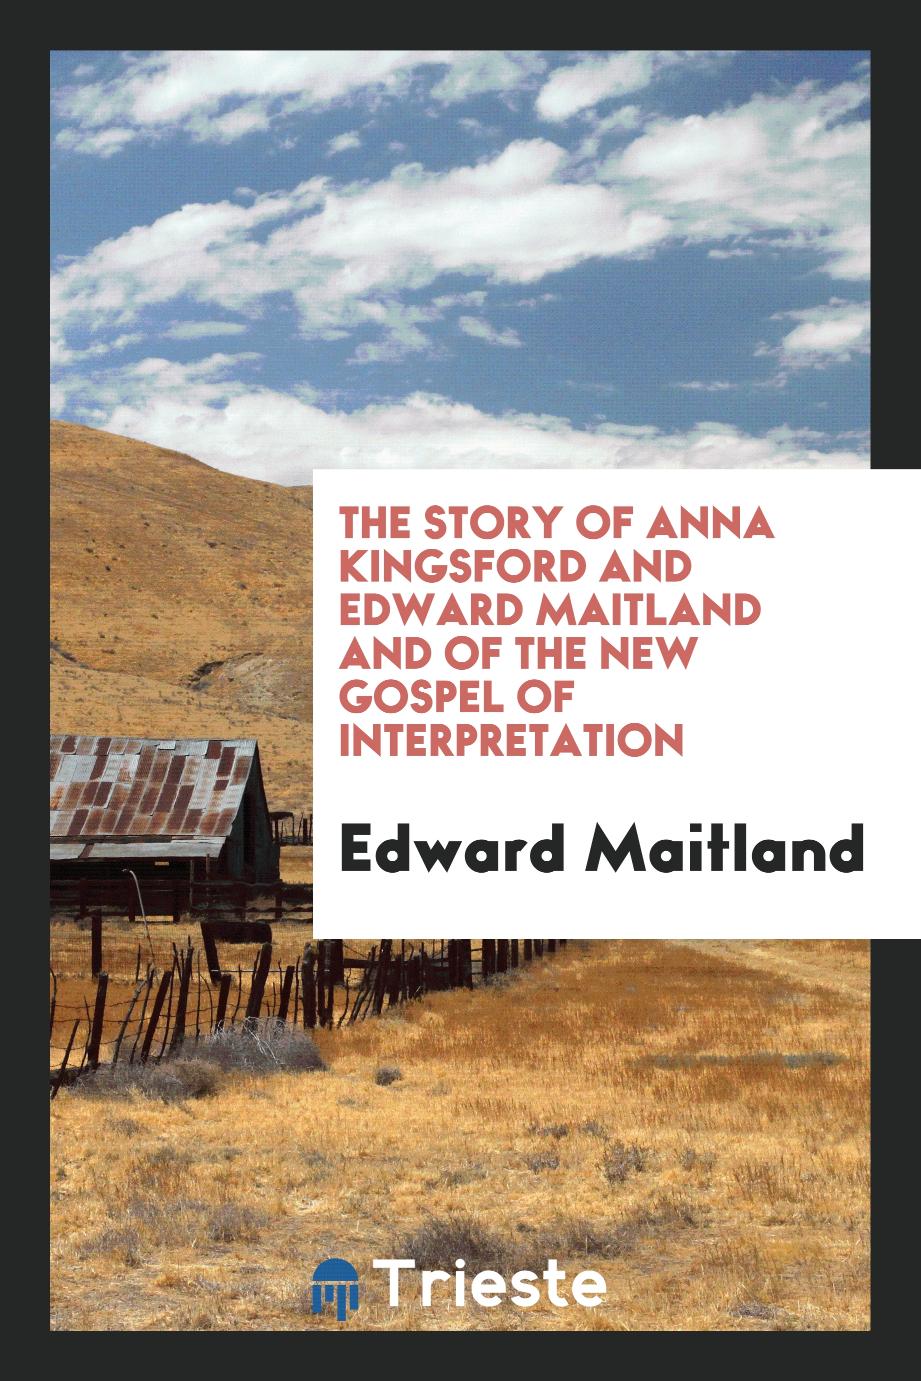 The story of Anna Kingsford and Edward Maitland and of the New Gospel of interpretation